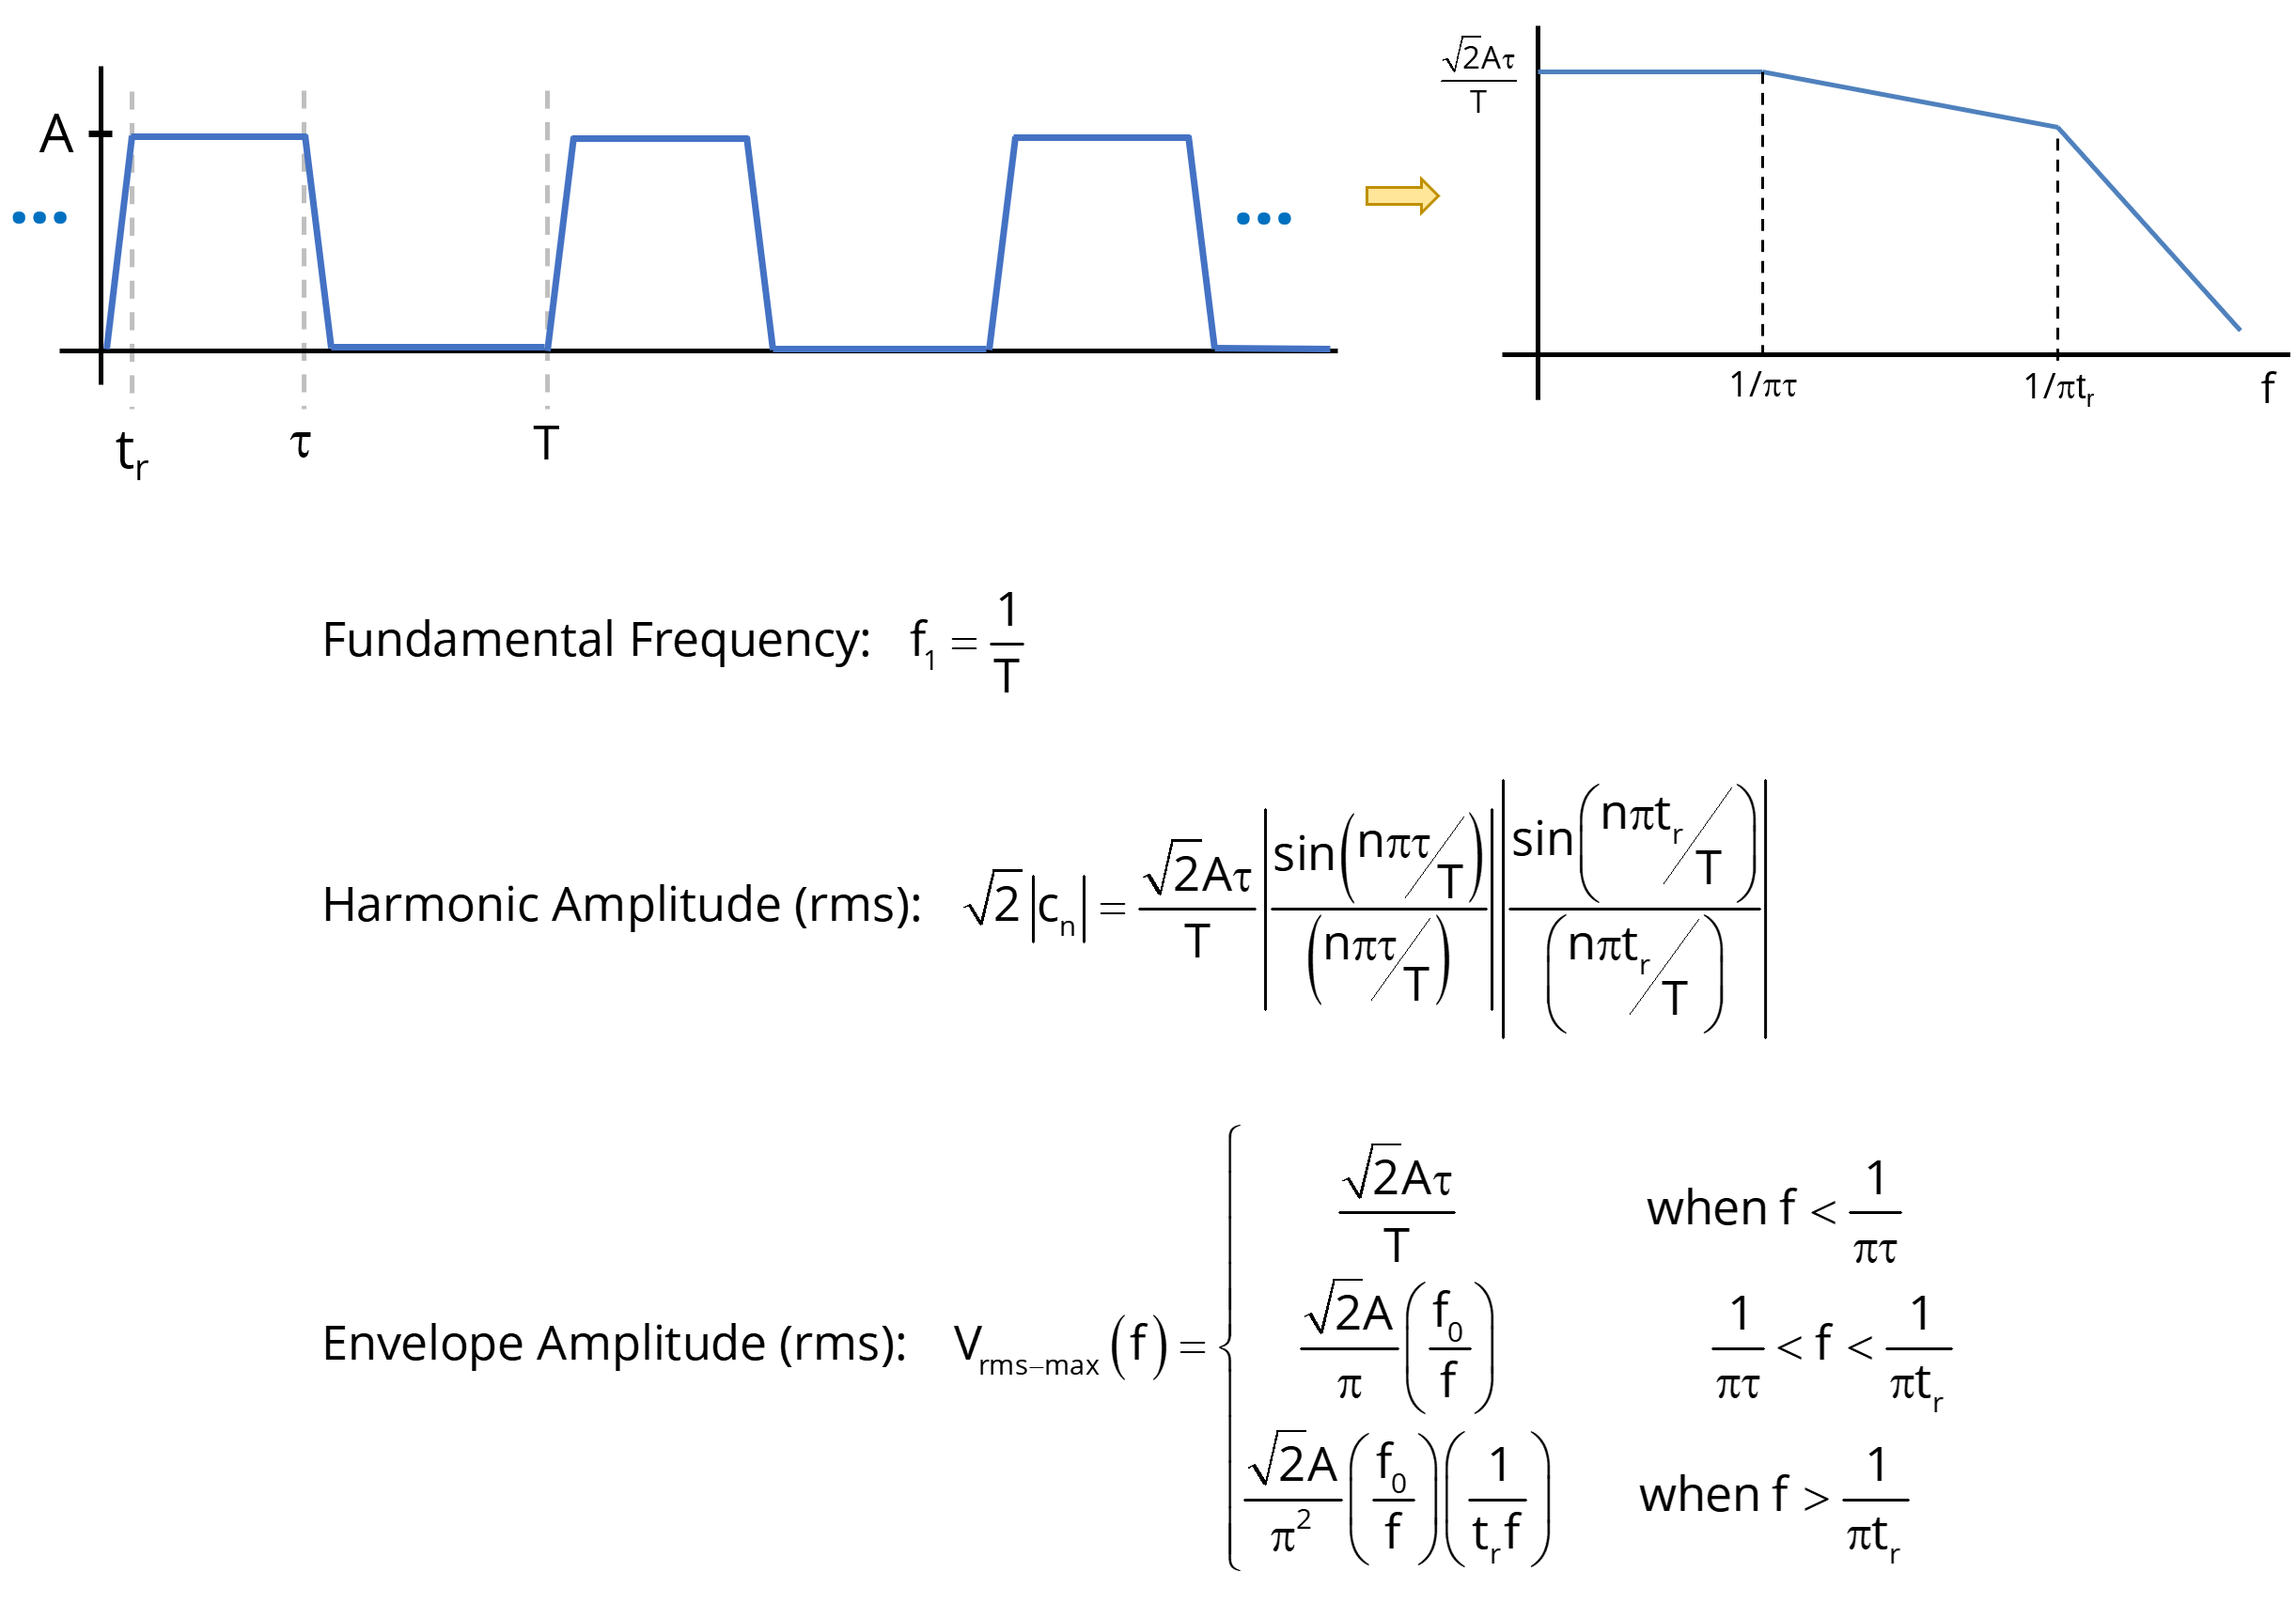 Fourier Series Coefficients of Trapezoidal Waveform and Envelope